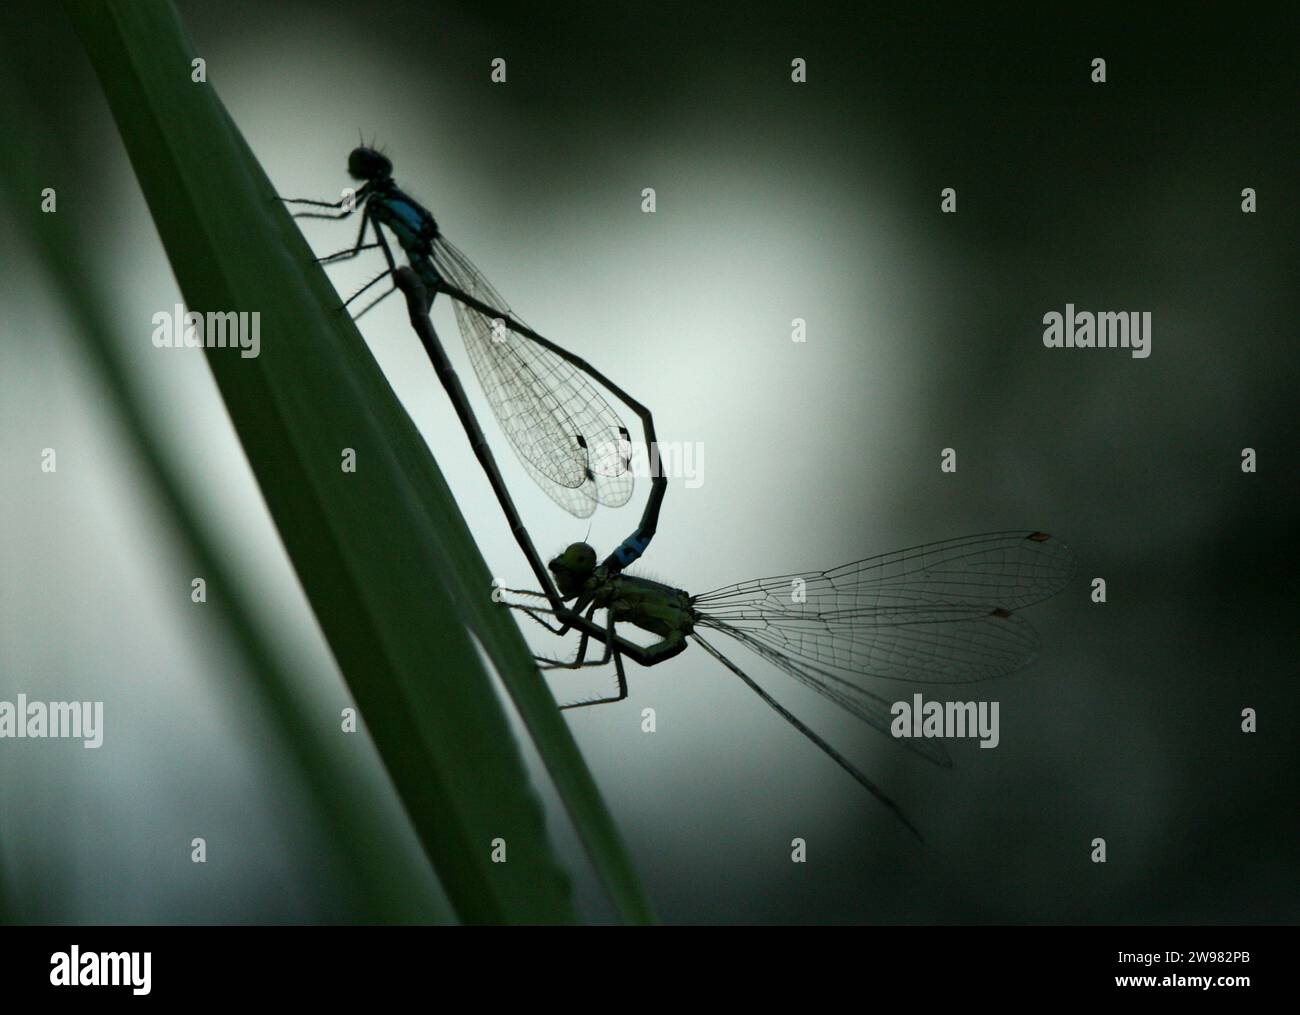 Mating damselflies silhouetted on a blade of grass, Newcastle, California. Stock Photo